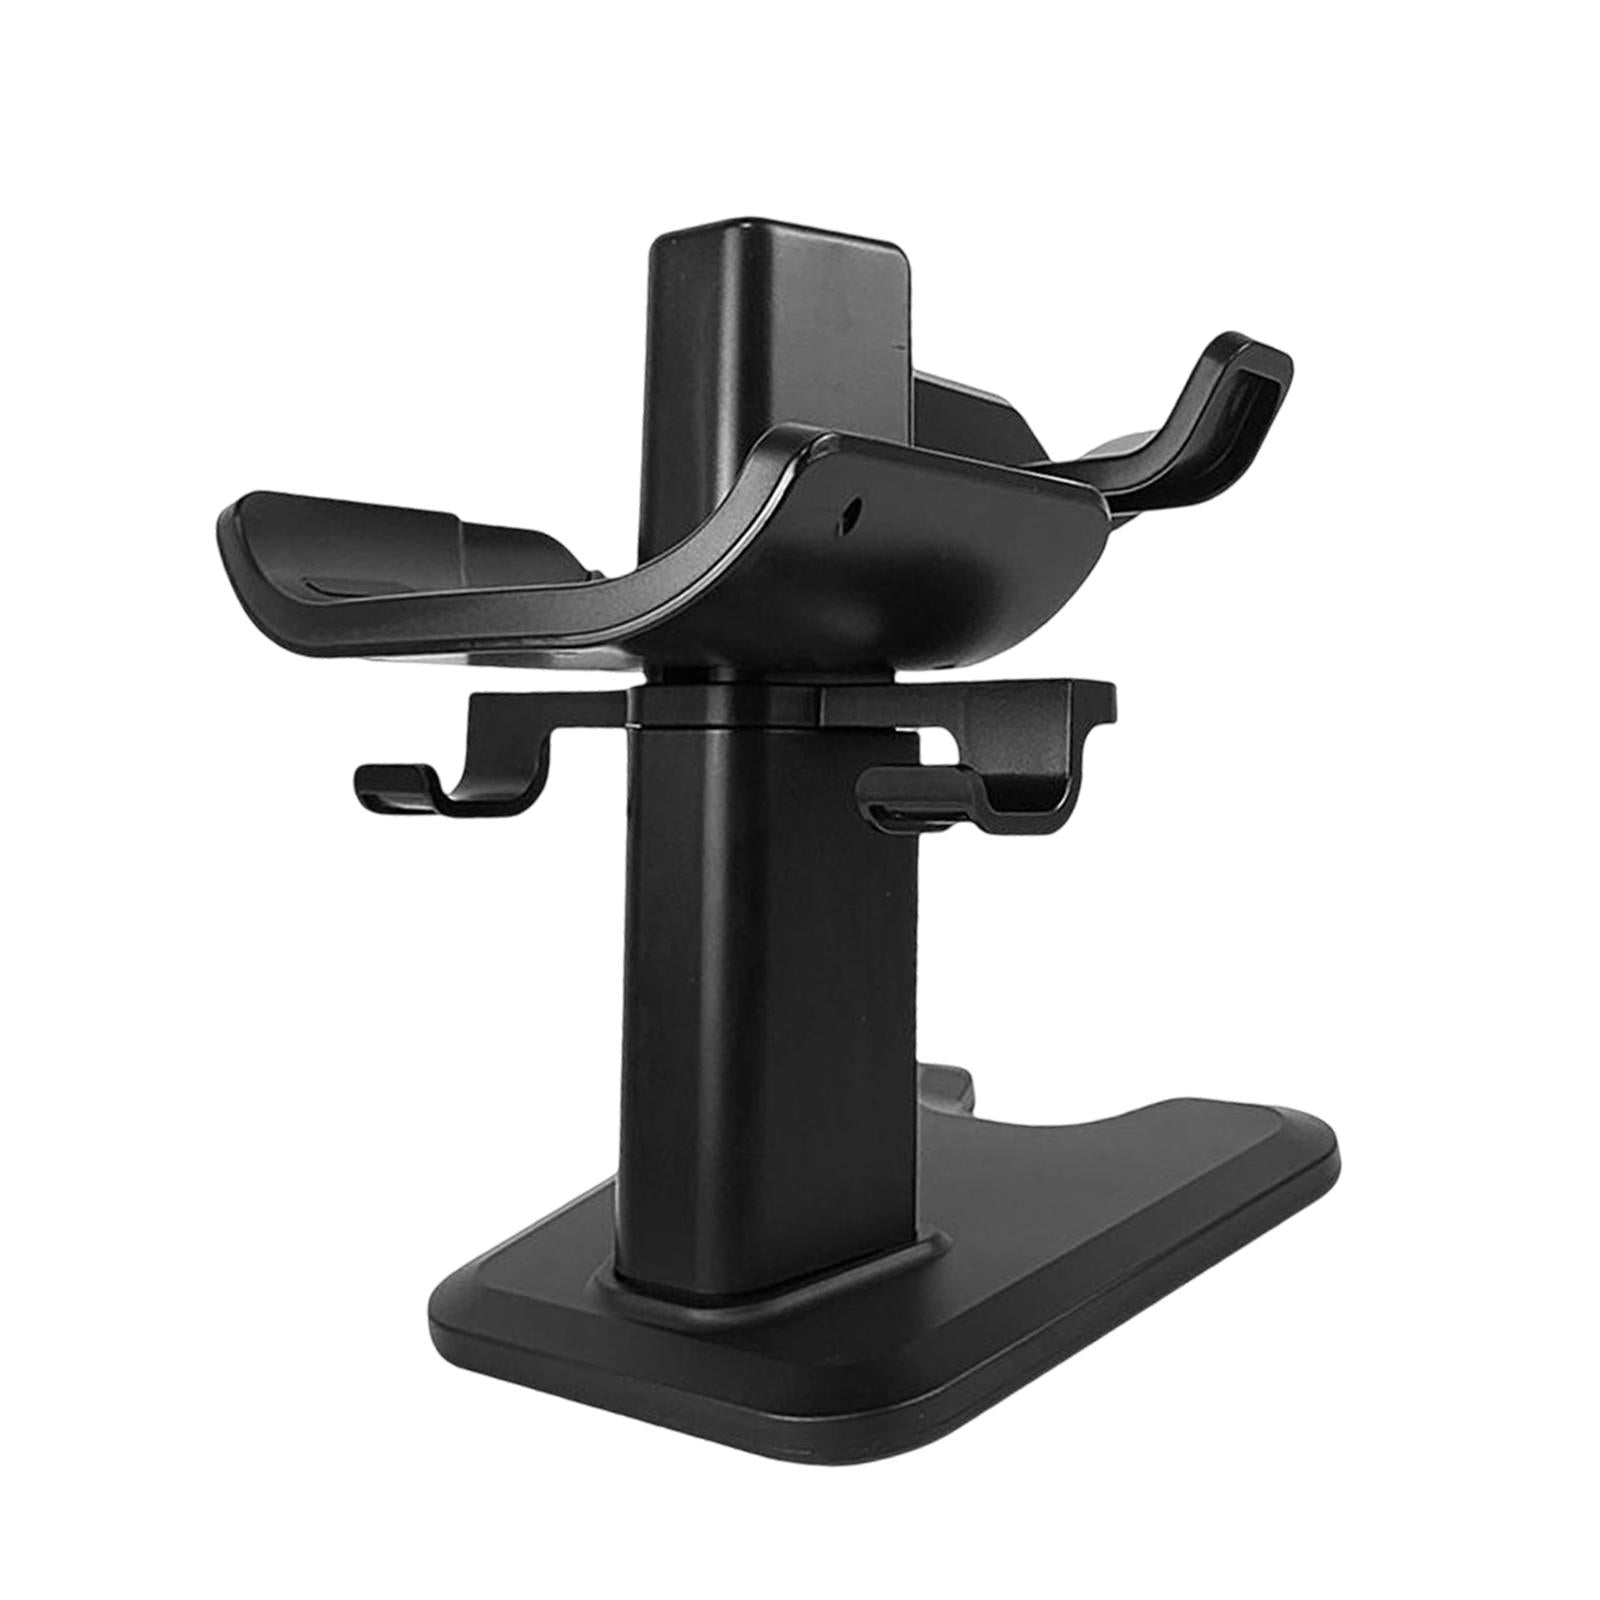 VR Stand Protection Controller Mount Station Storage Stand Stable for Quest2 Black